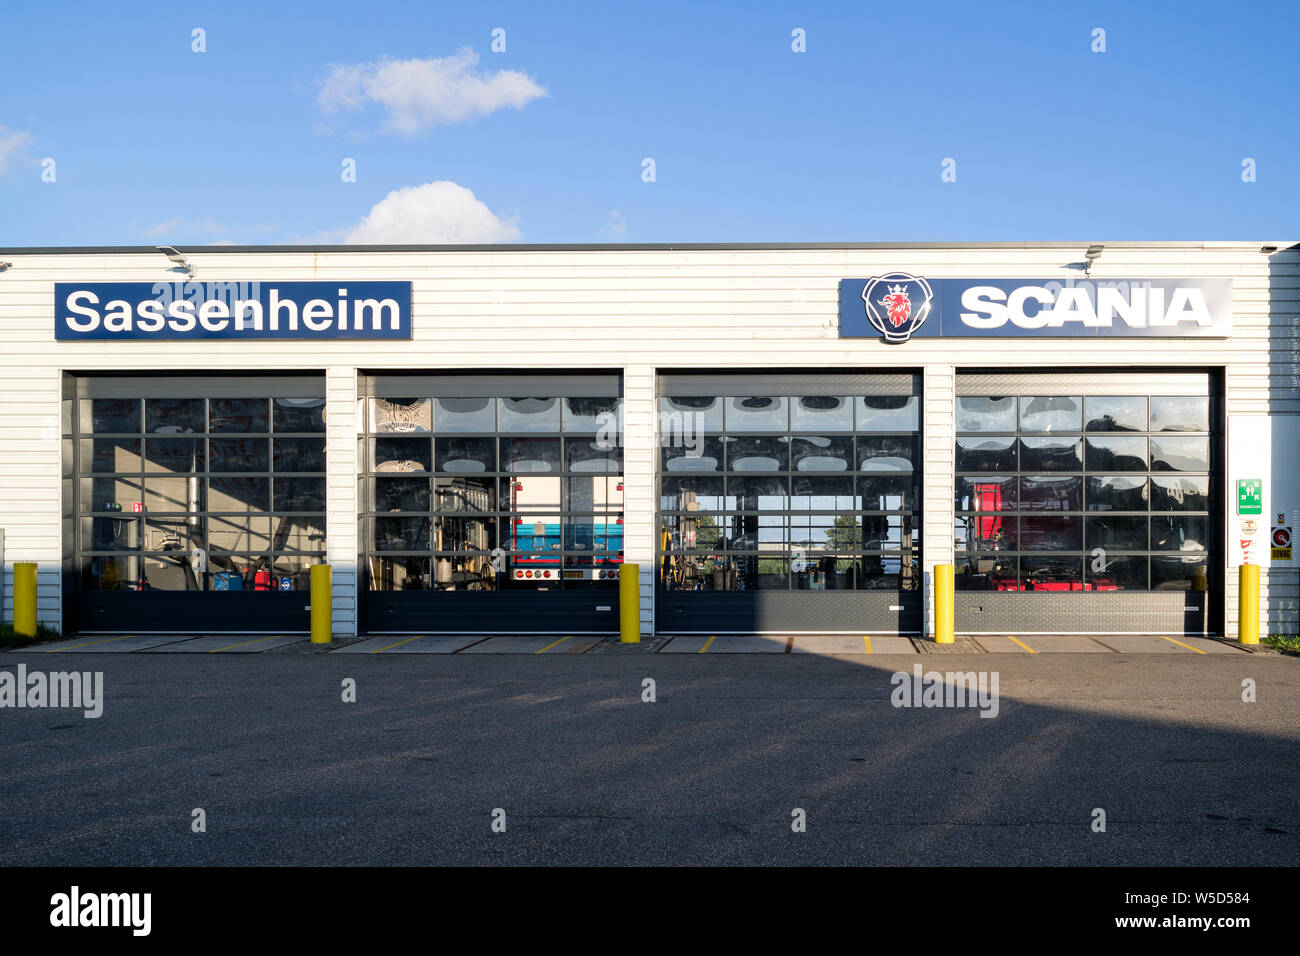 Scania garage in Sassenheim, The Netherlands. Scania AB is a major Swedish manufacturer of commercial vehicles. Stock Photo